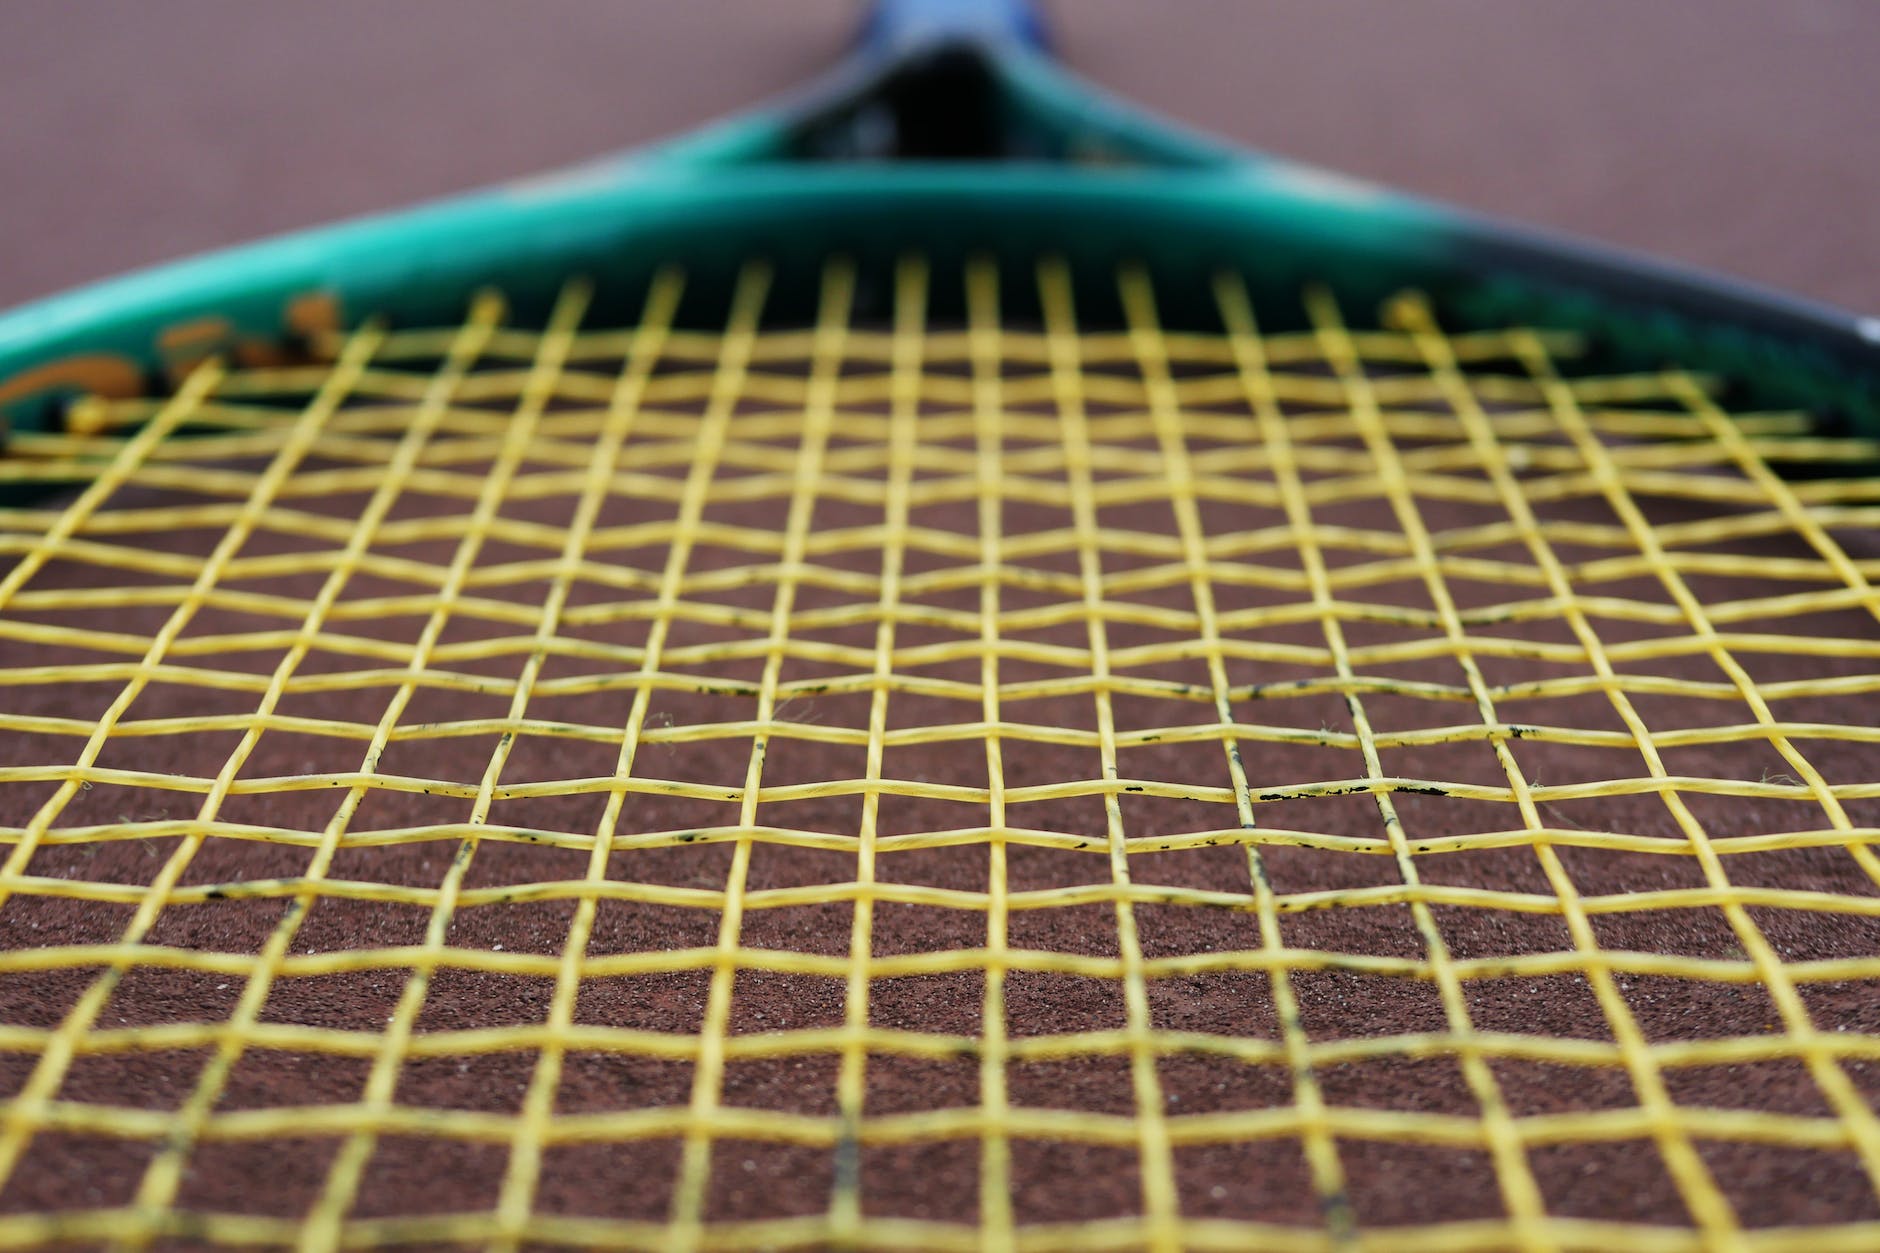 a yellow tennis racket strings in macro photography